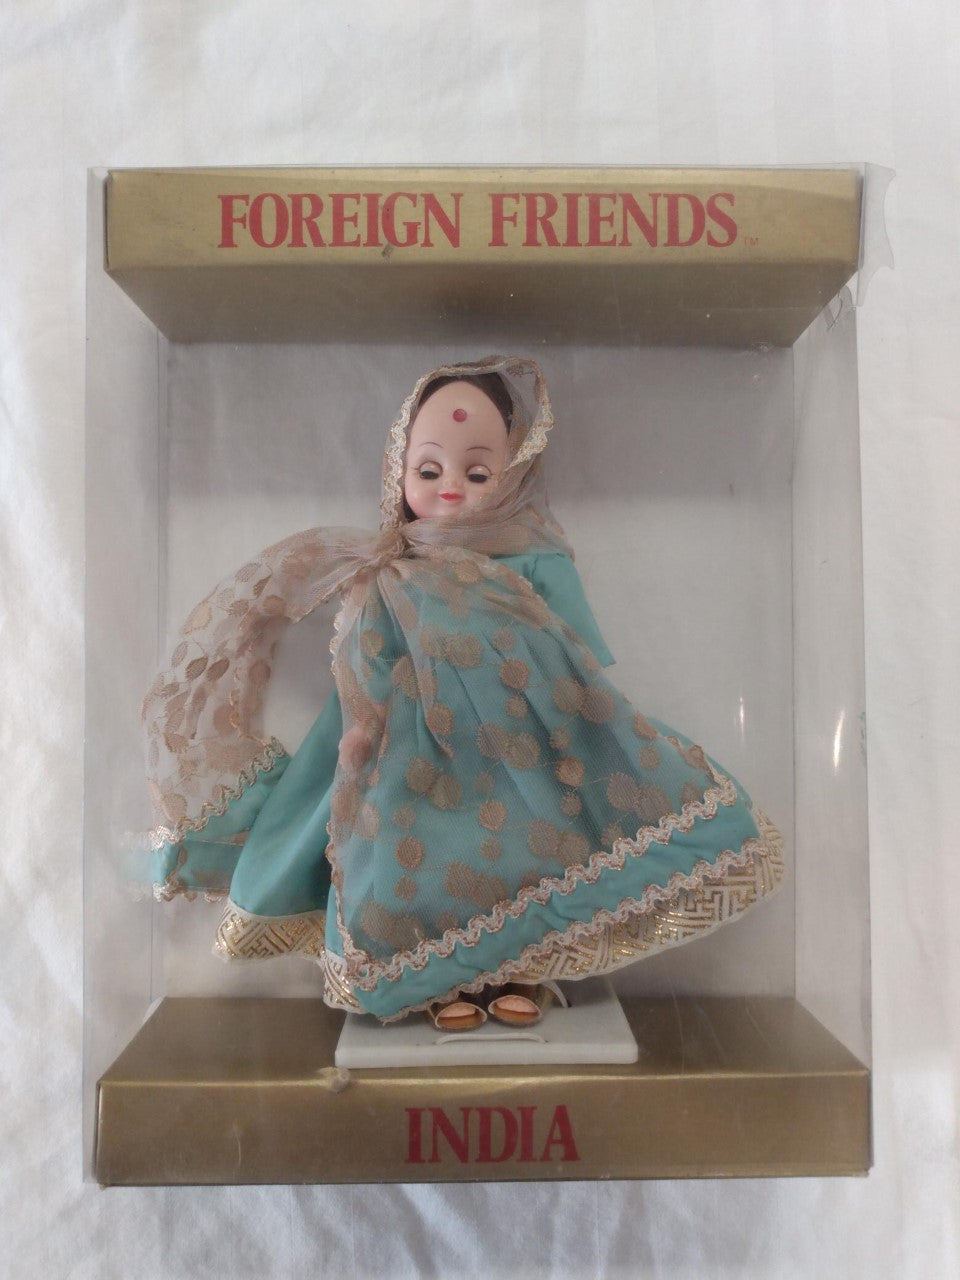 Vintage Foreign Friends 8" Doll (INDIA)- Original Box